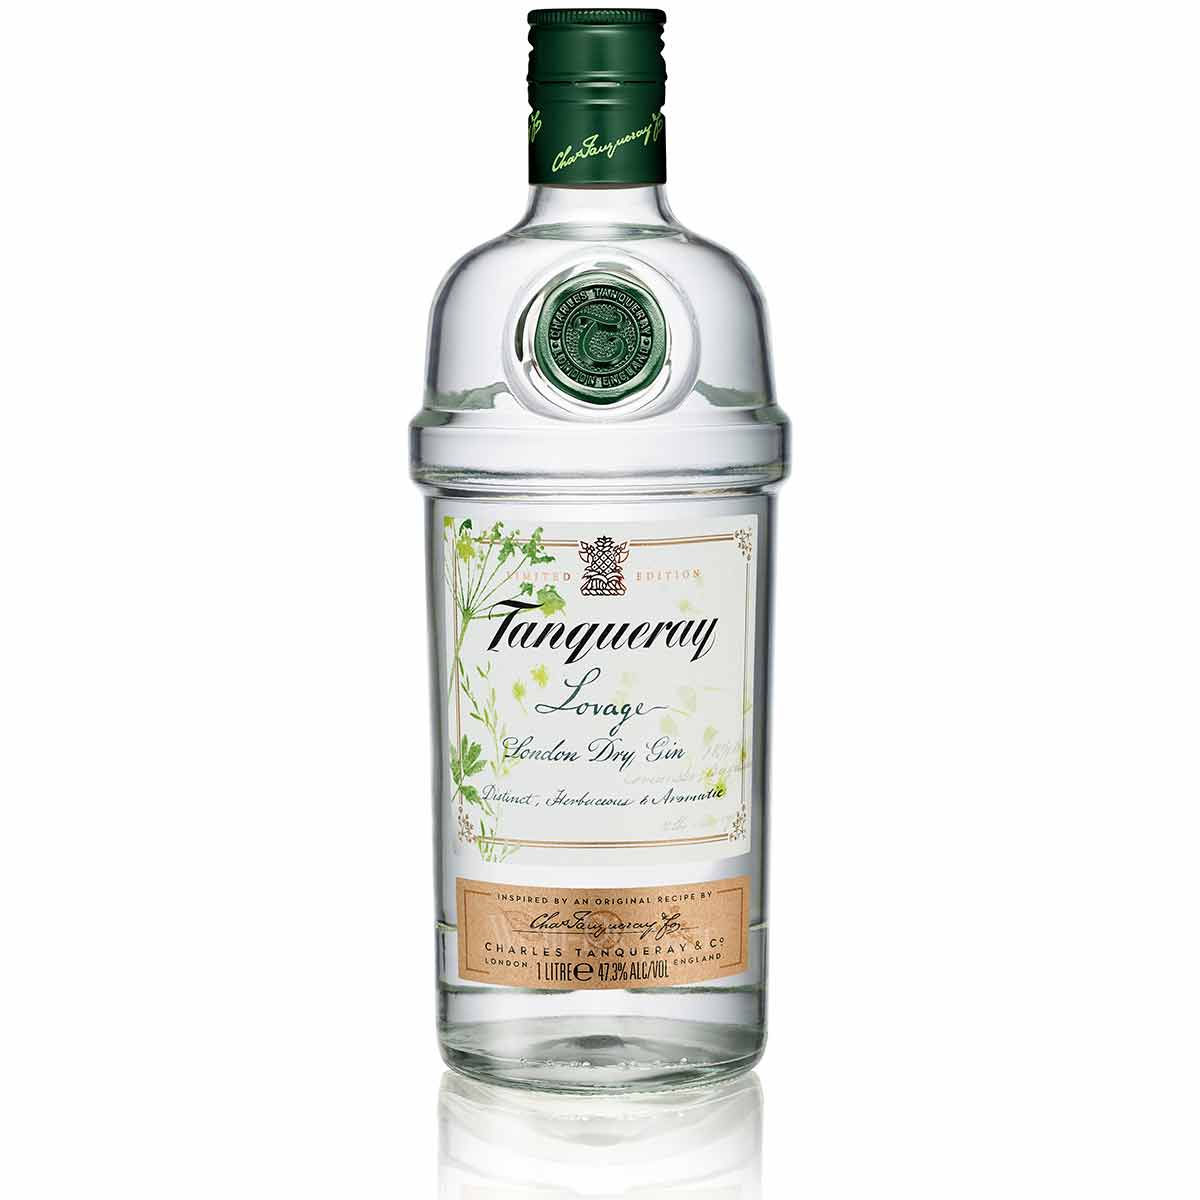 Tanqueray | Lovage London Dry Gin | 1 Liter